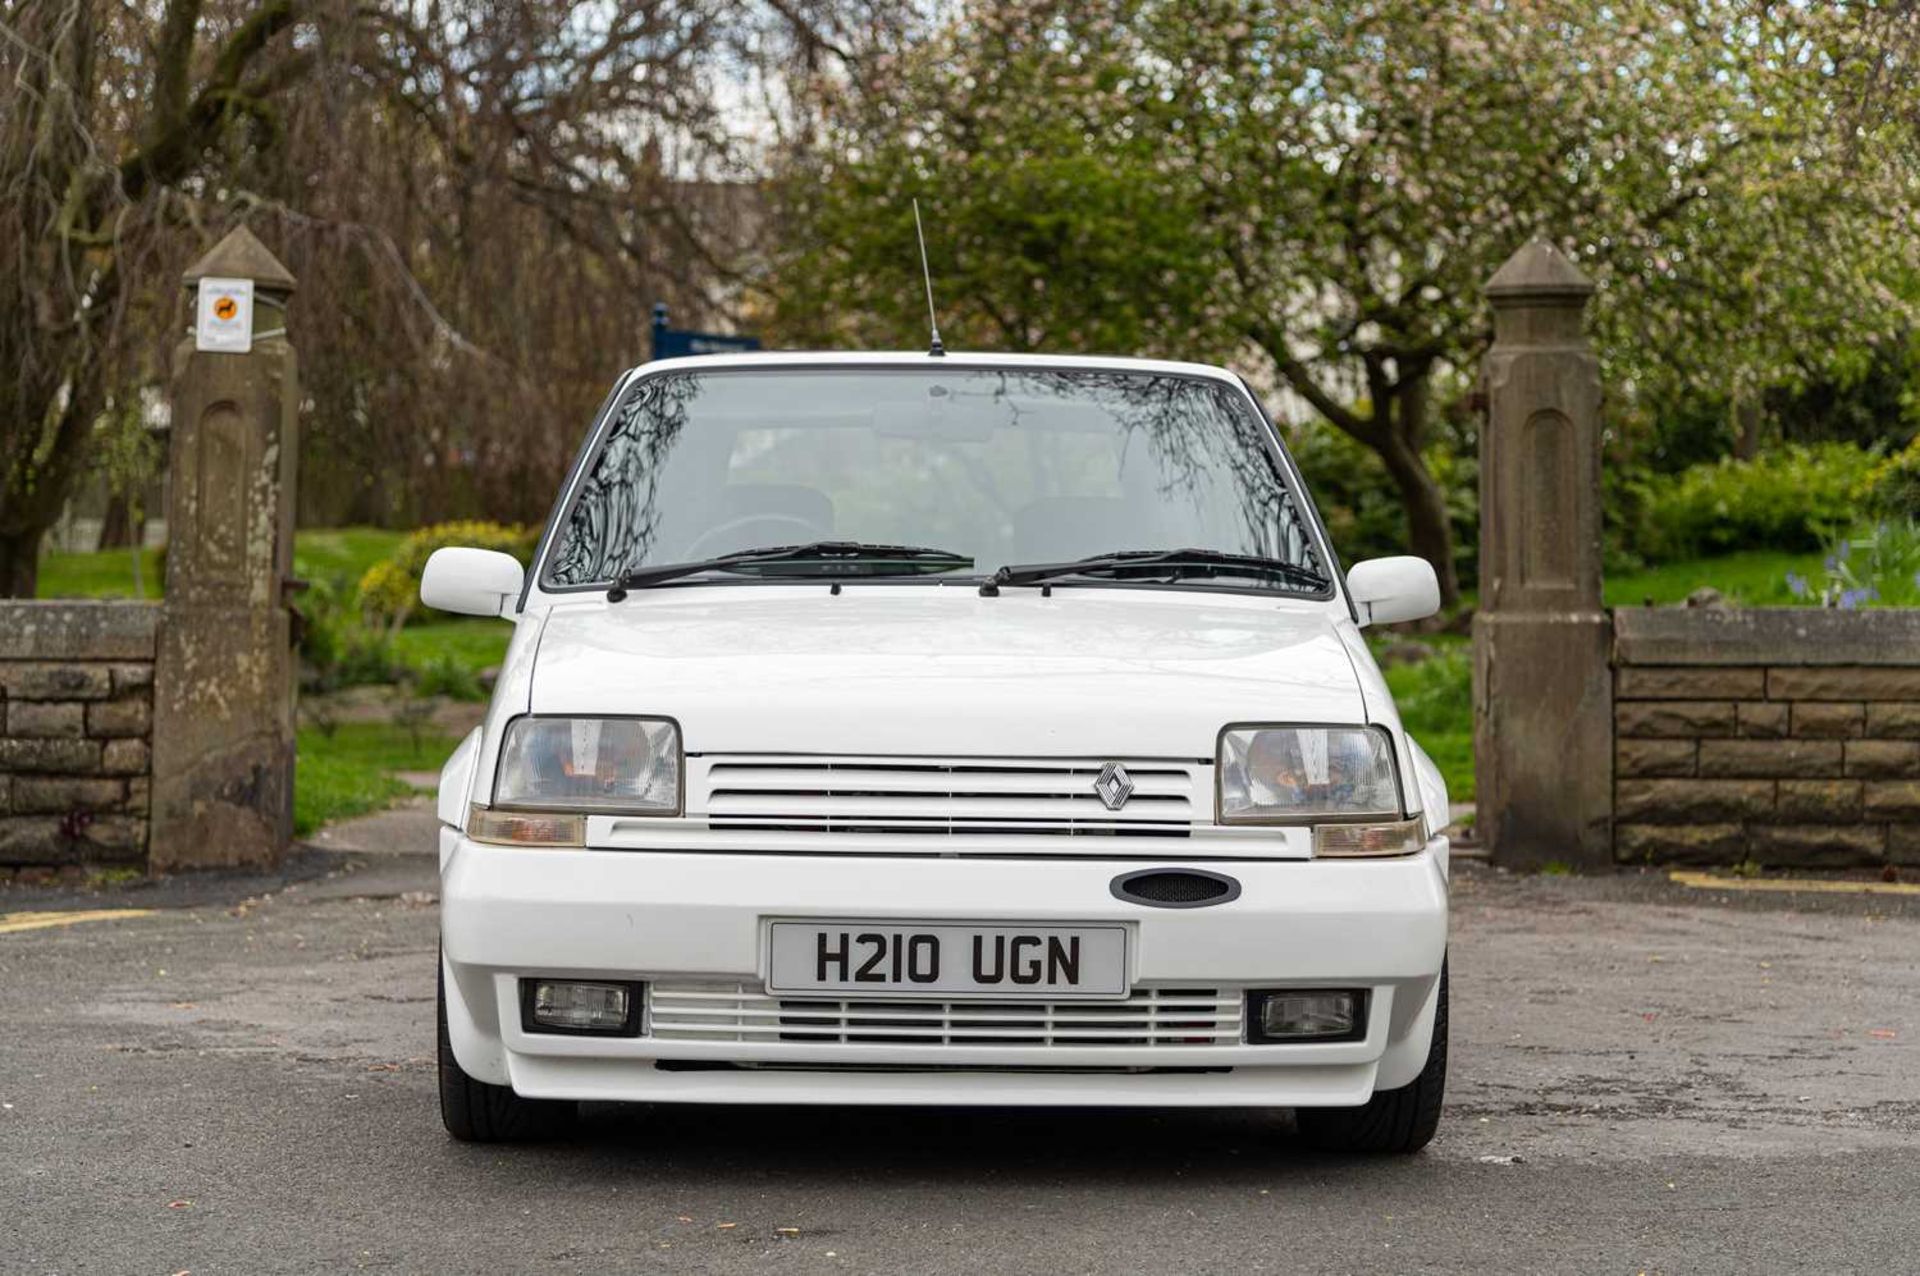 1990 Renault 5 GT Turbo - Image 3 of 79